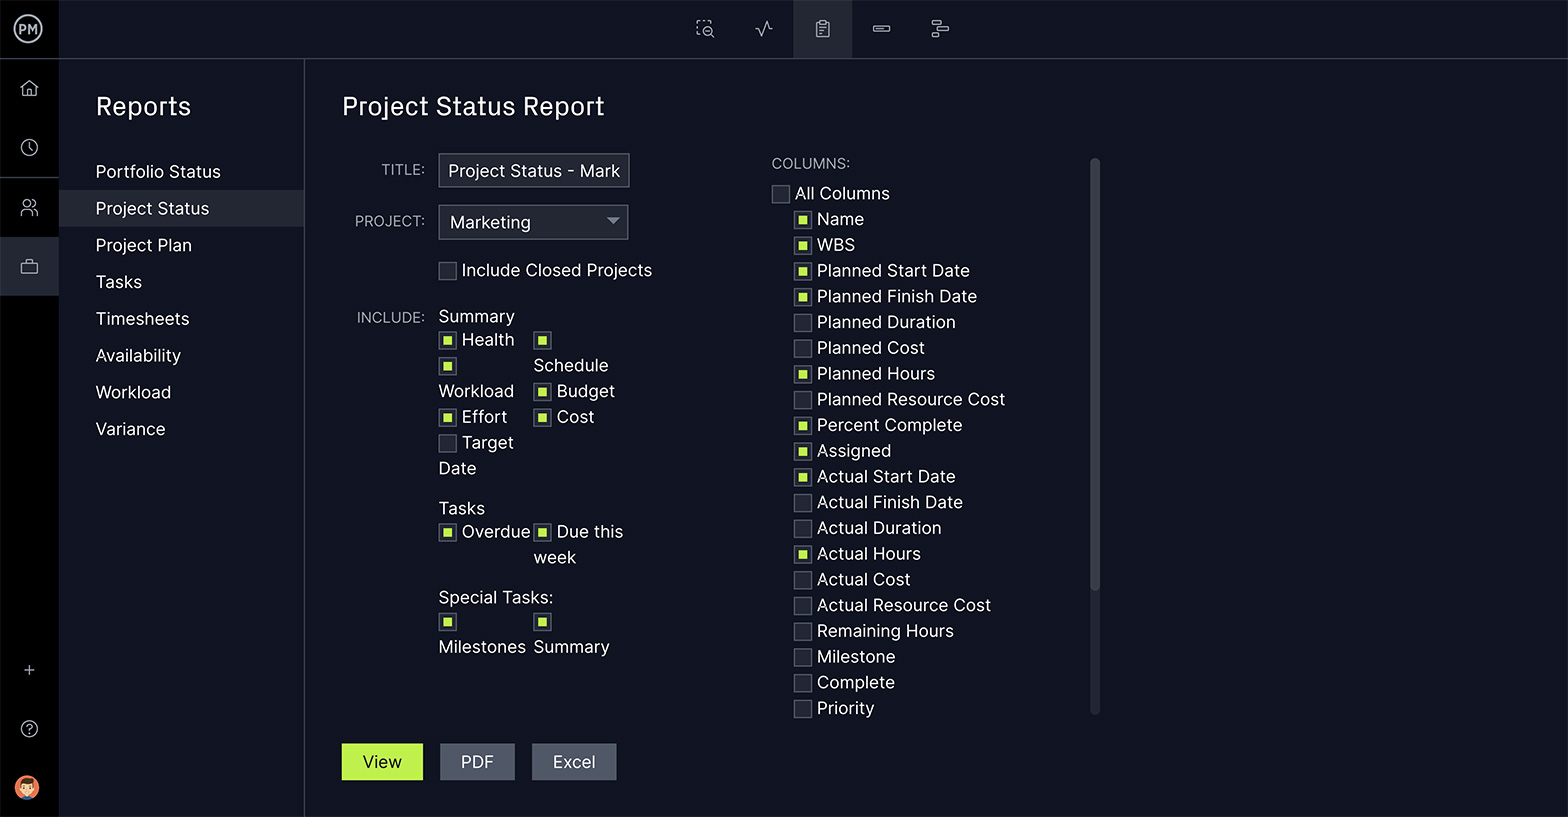 ProjectManager allows you to create project reports for program and project management